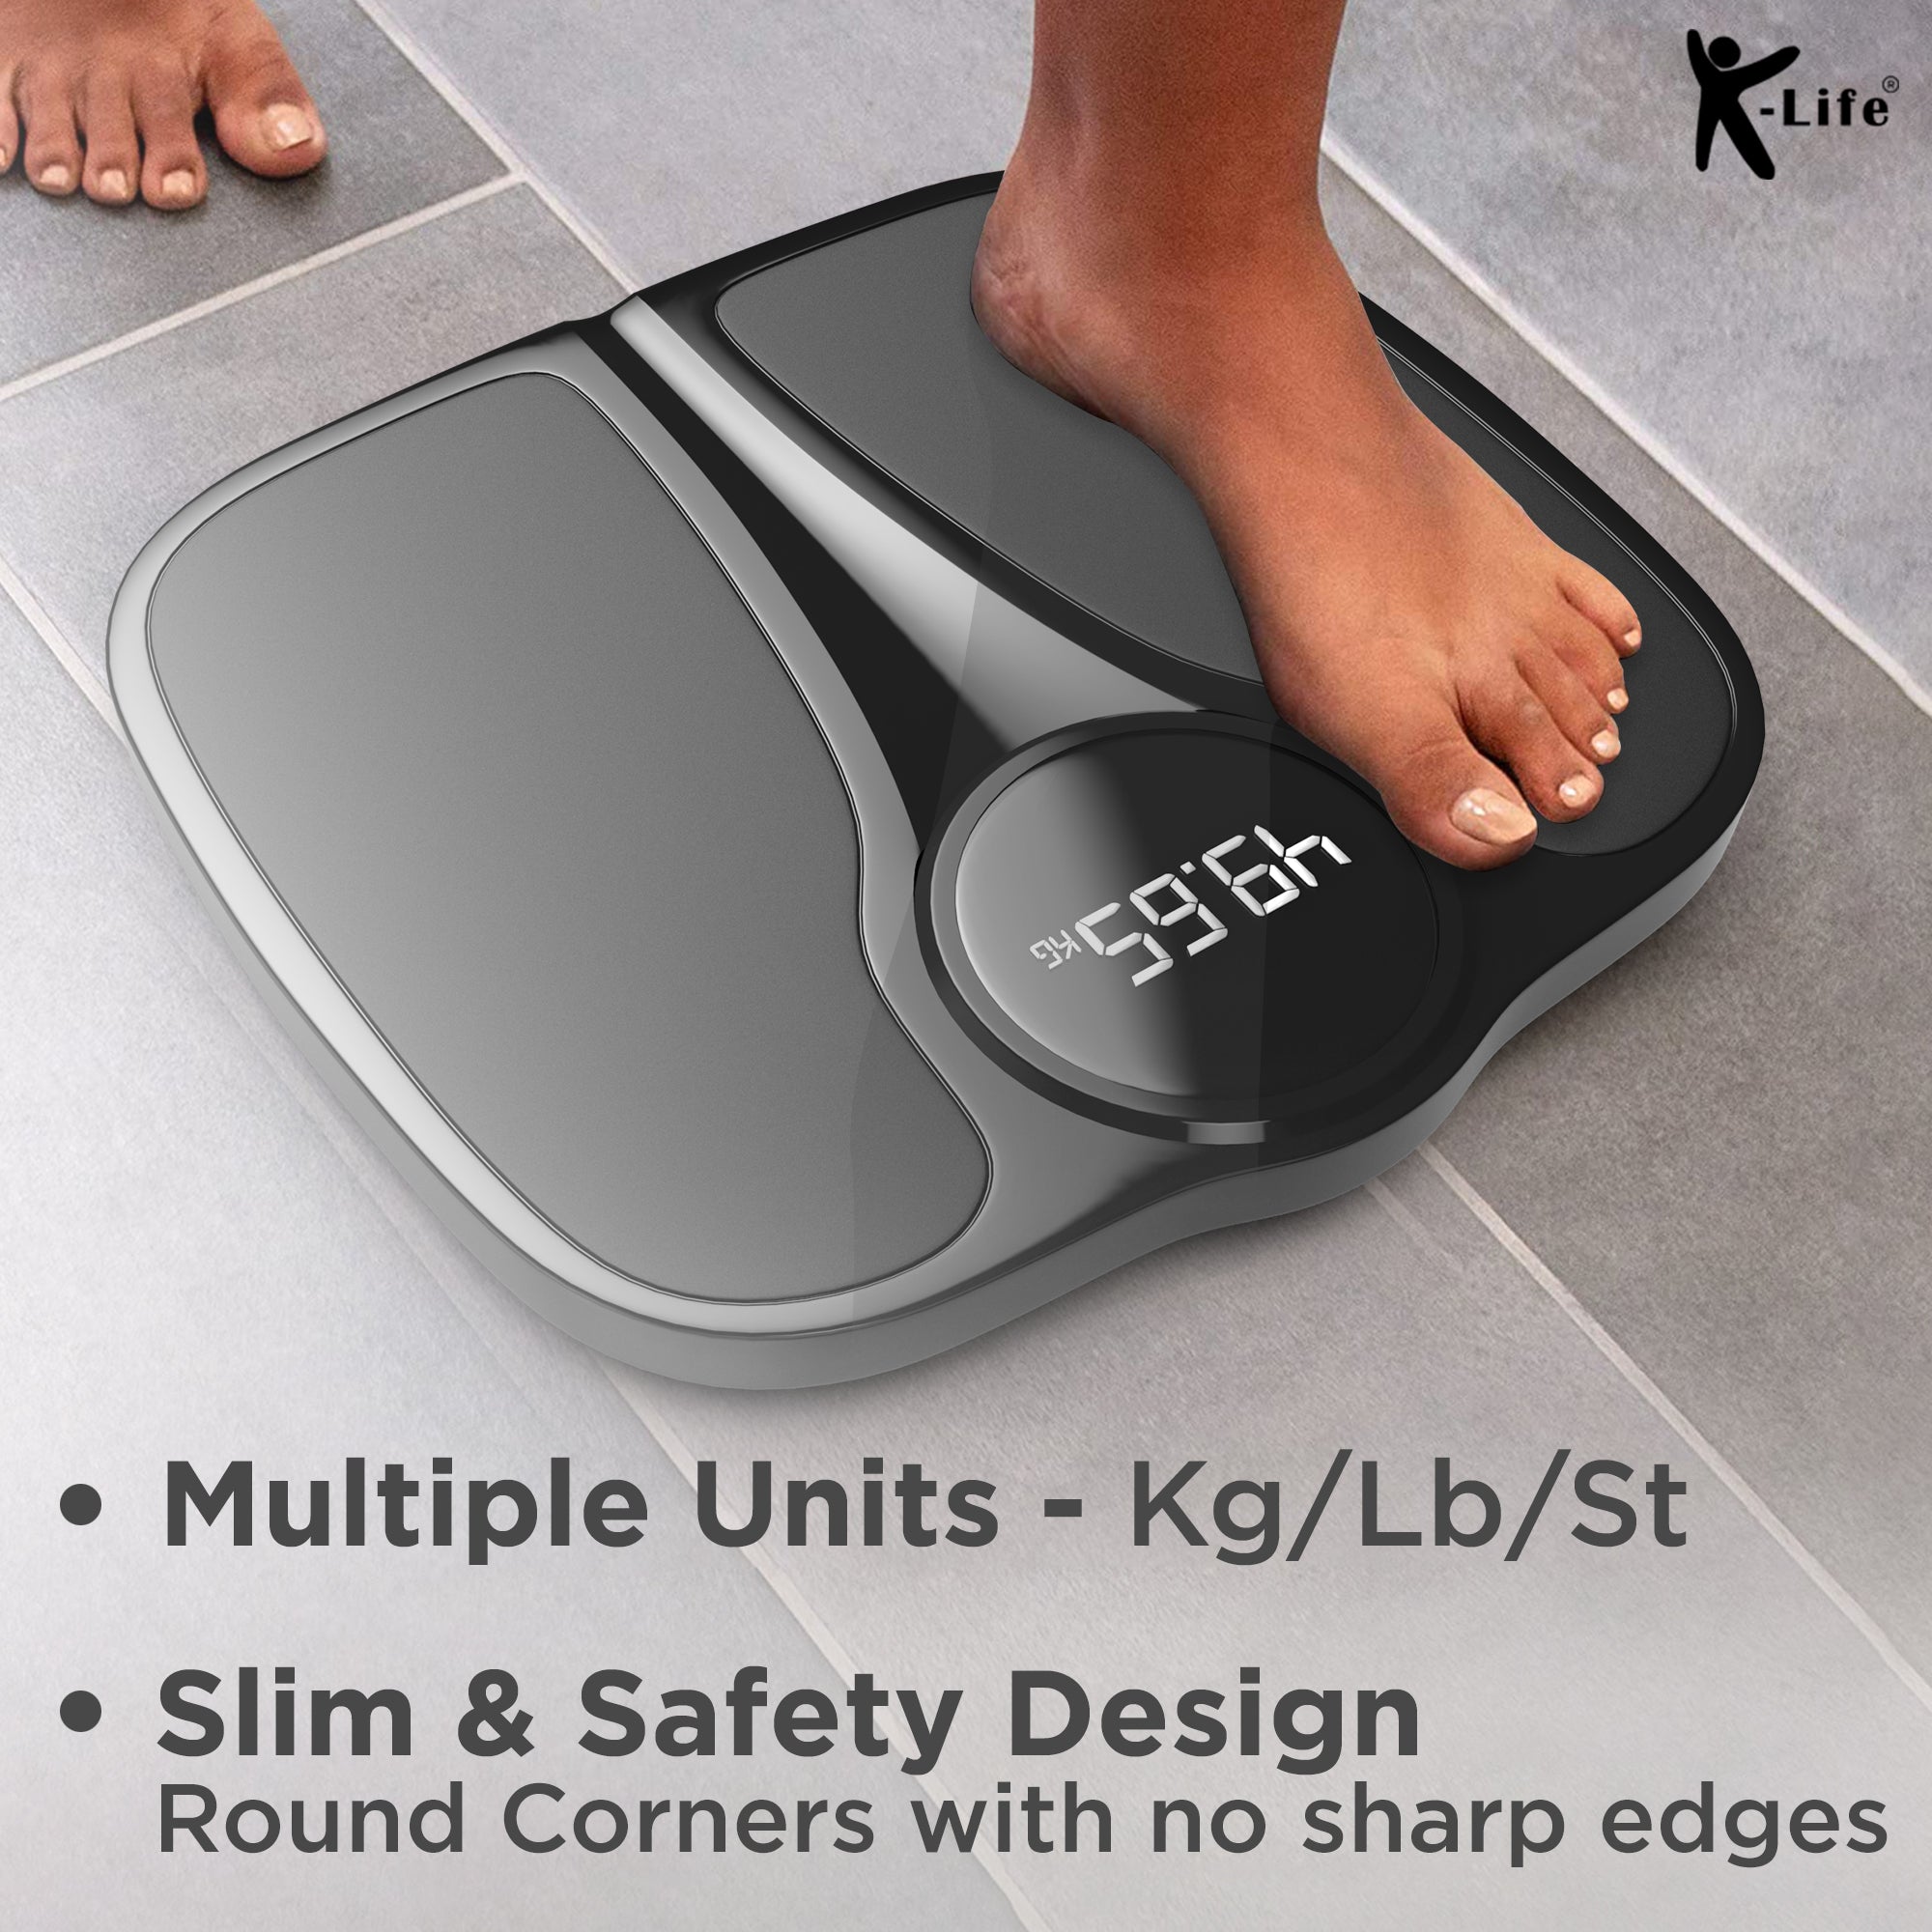 K-Life WS-102 Digital Personal Electronic Body Weight Machine for Human Body 200 kg Capacity Weighing Scale, Black